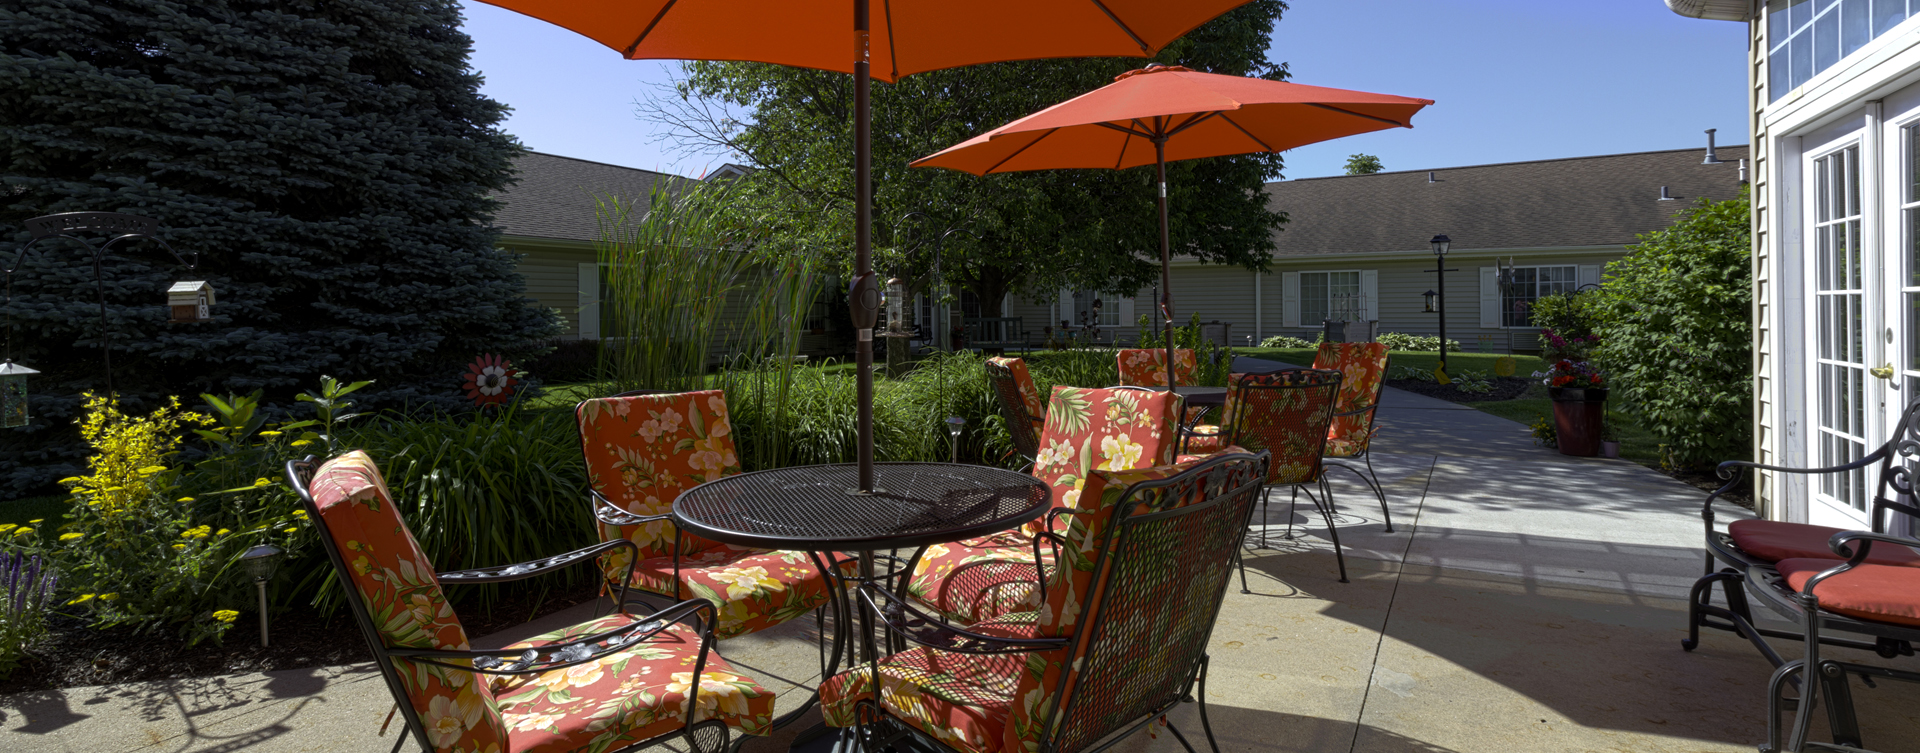 Enjoy the outdoors in a whole new light by stepping into our secure courtyard at Bickford of Omaha - Hickory